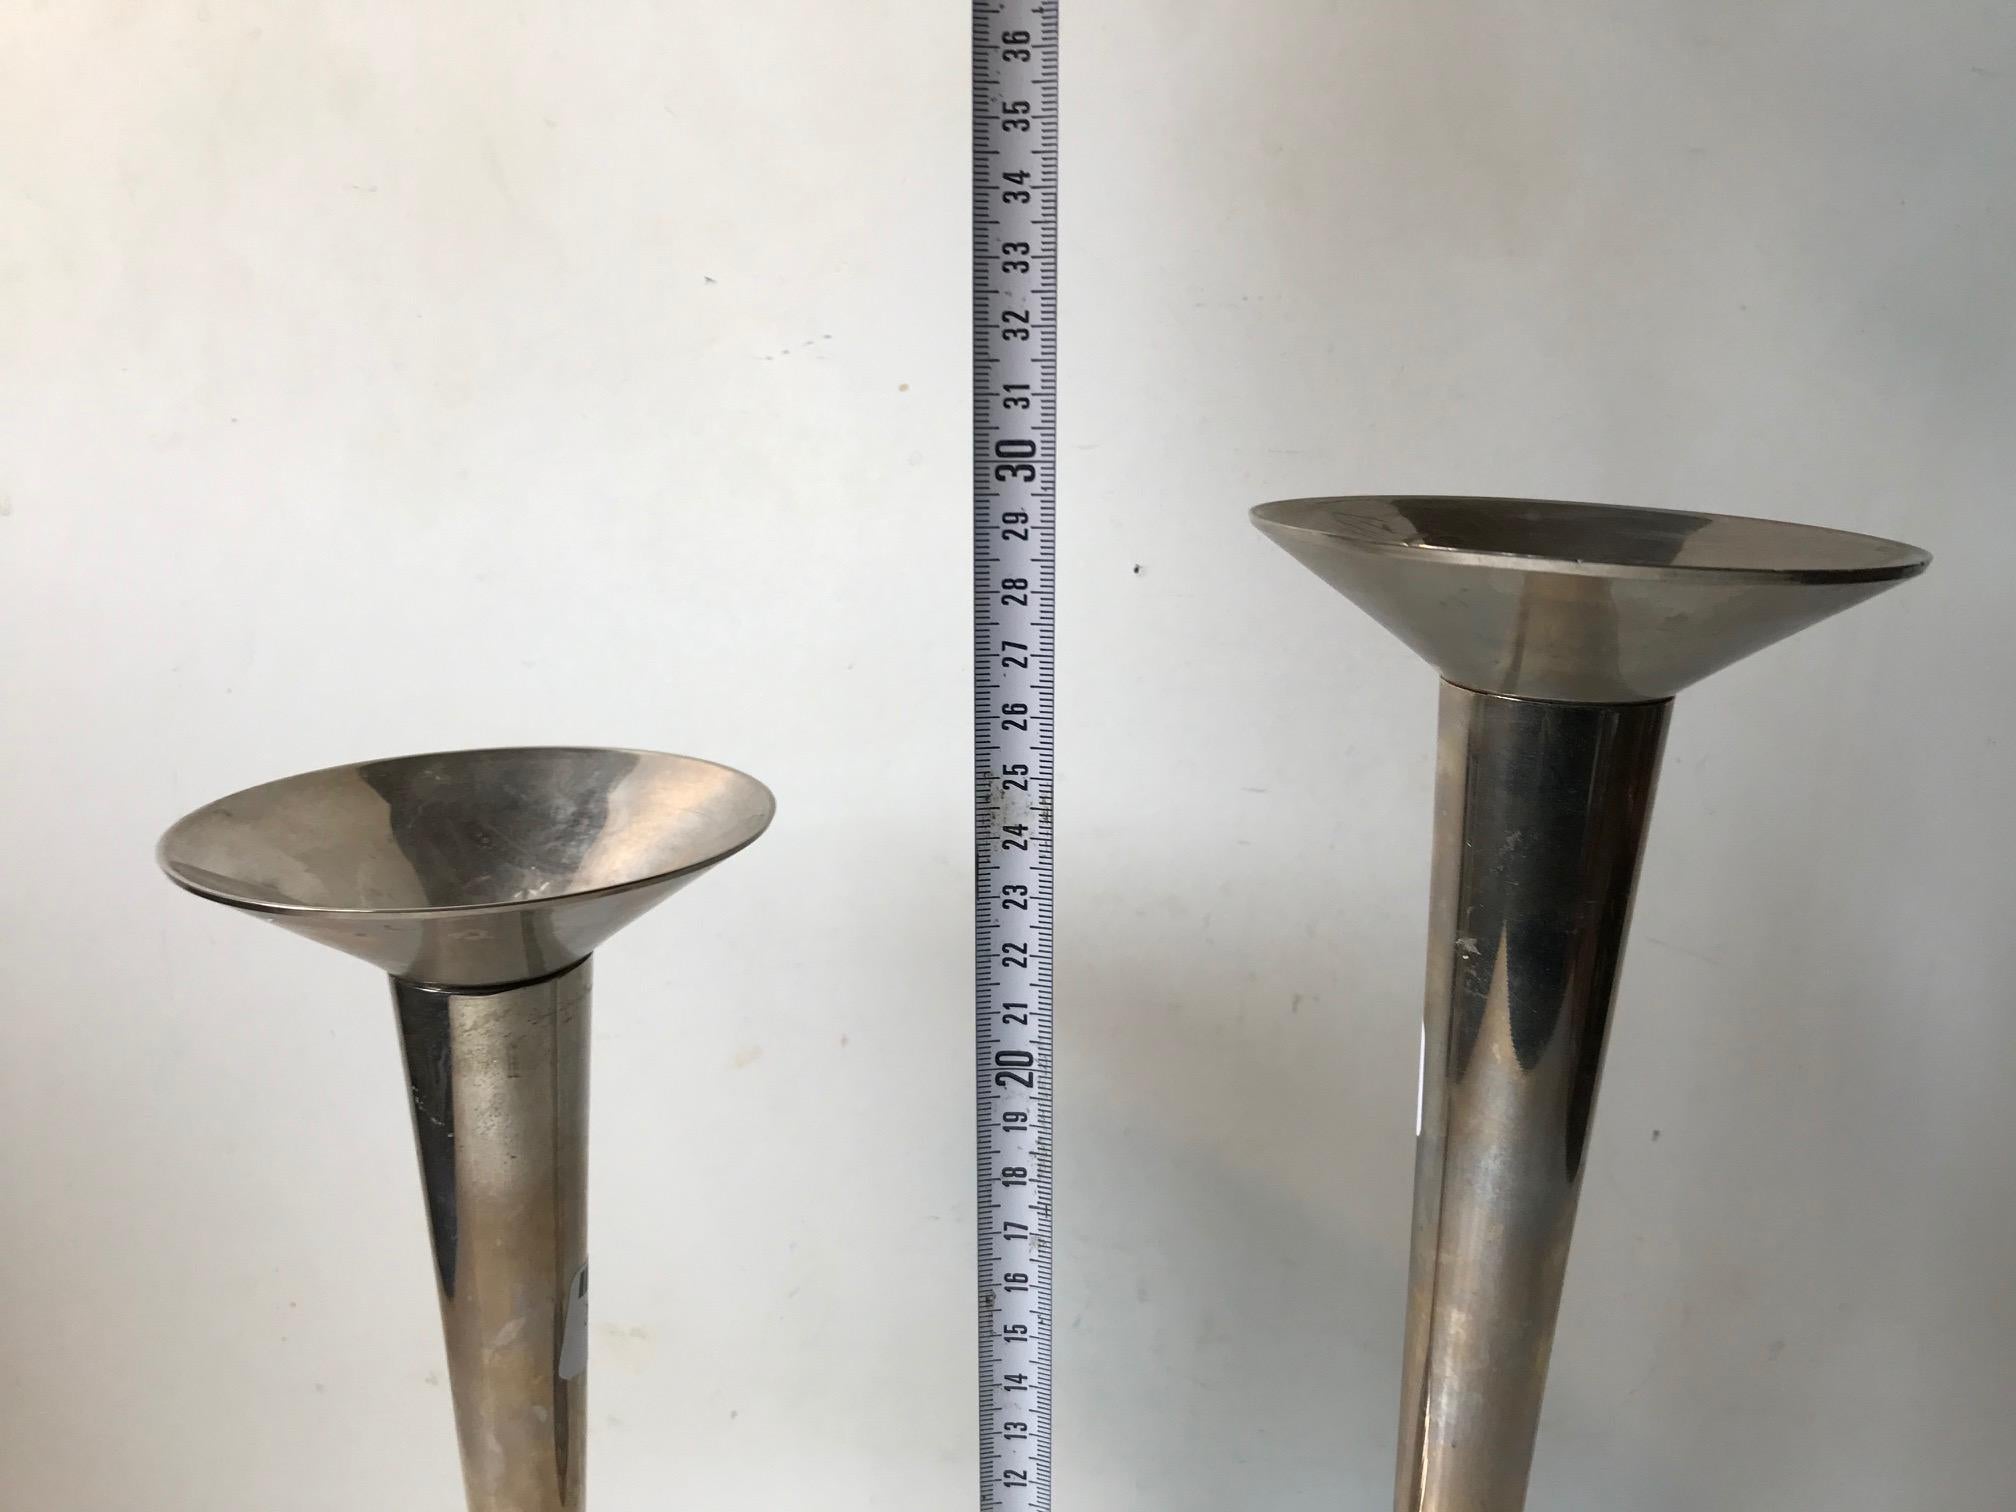 Bauhaus Art Deco Candlesticks in Steel, Germany, 1930s For Sale